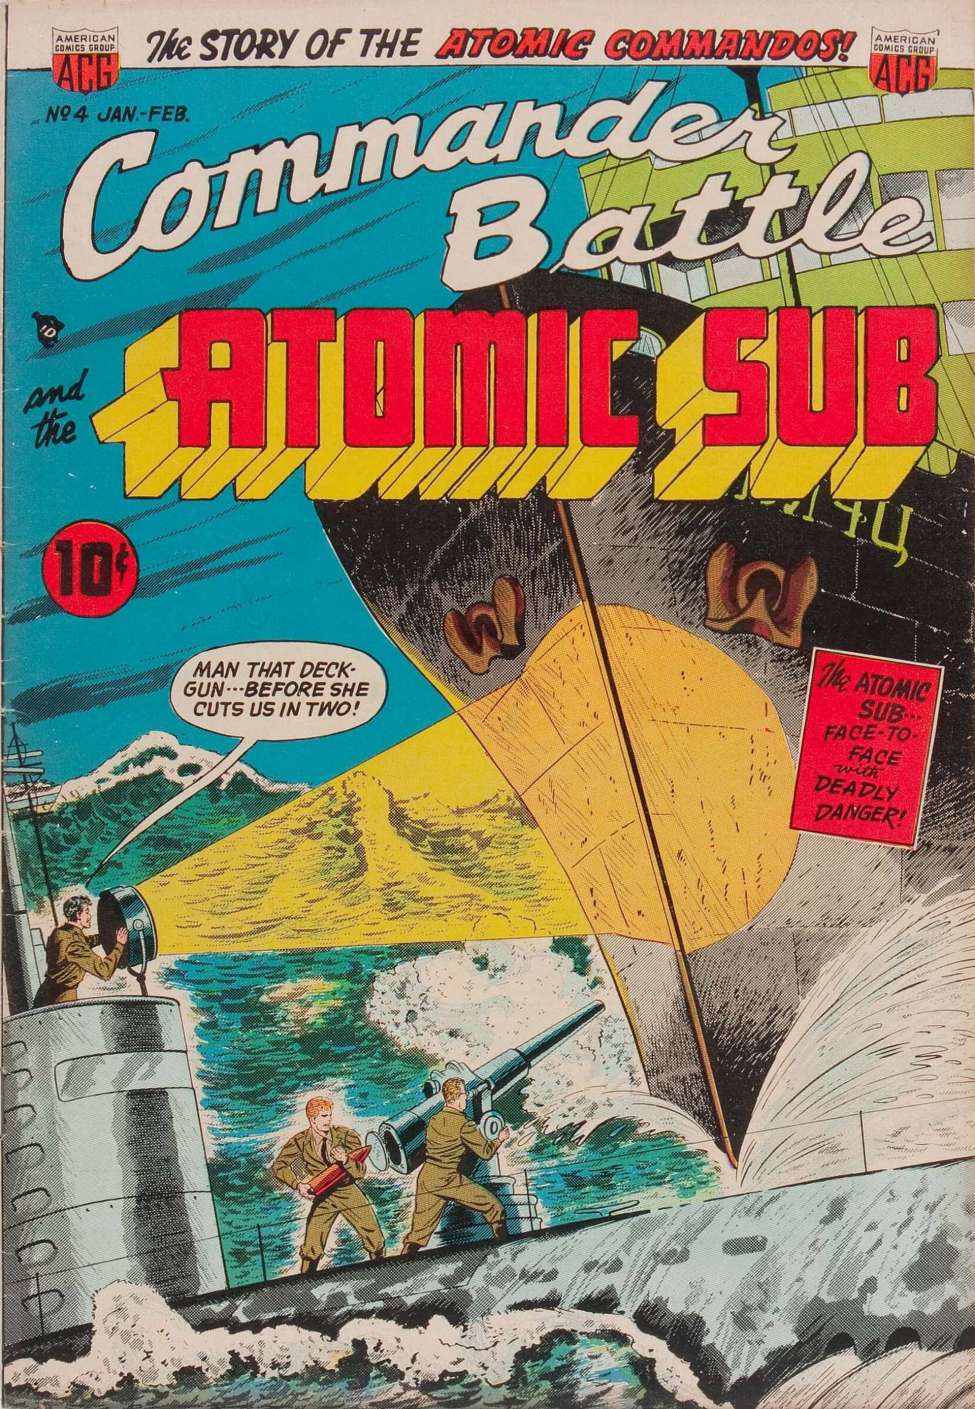 Book Cover For Commander Battle and the Atomic Sub 4